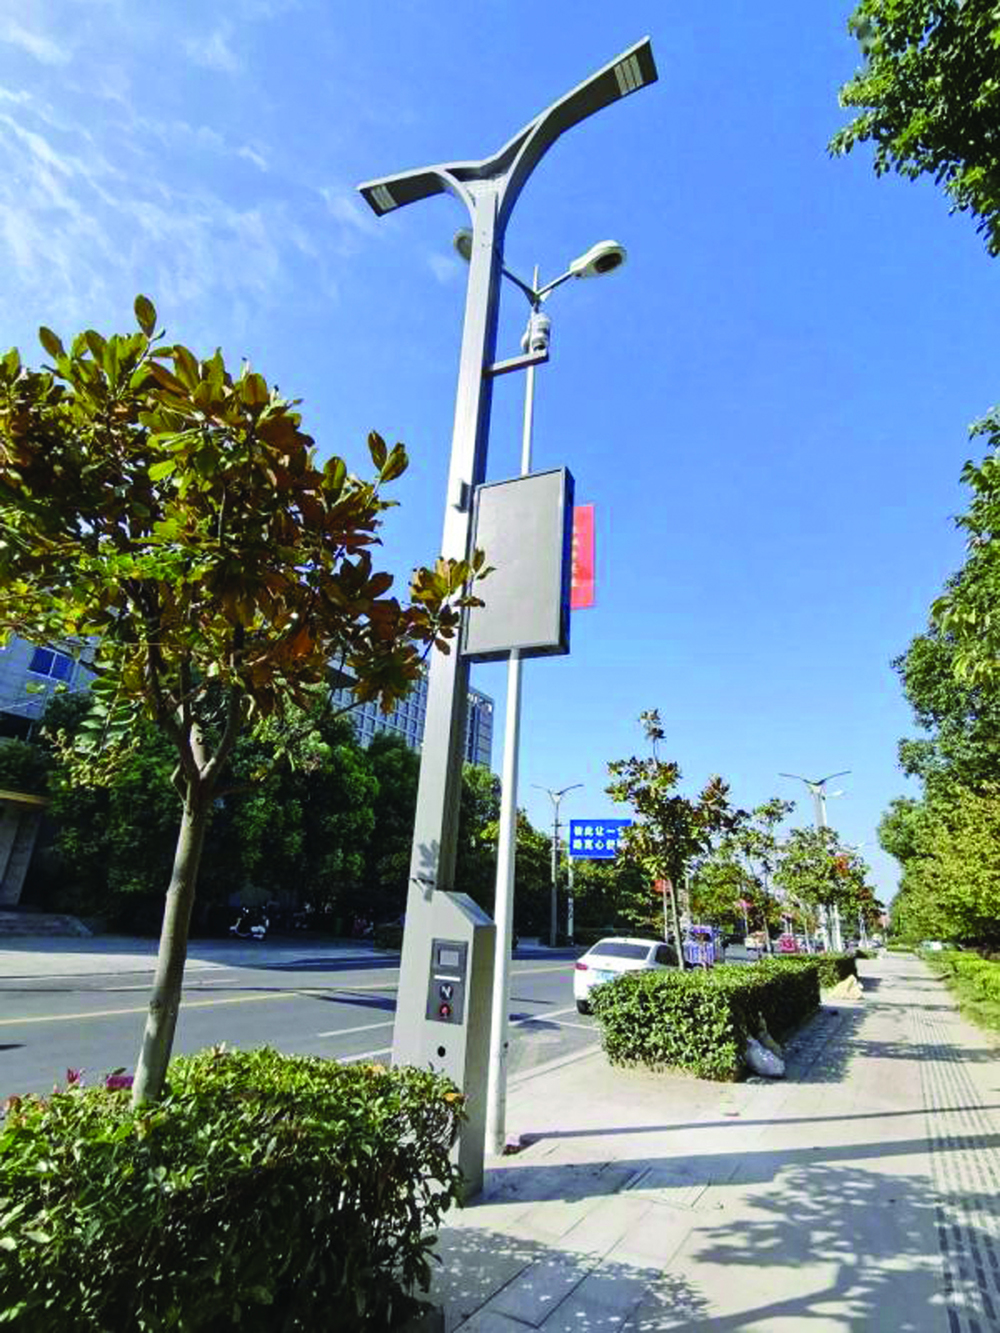 5g intelligent street lamp realizes automatic alarm, charging and other functions